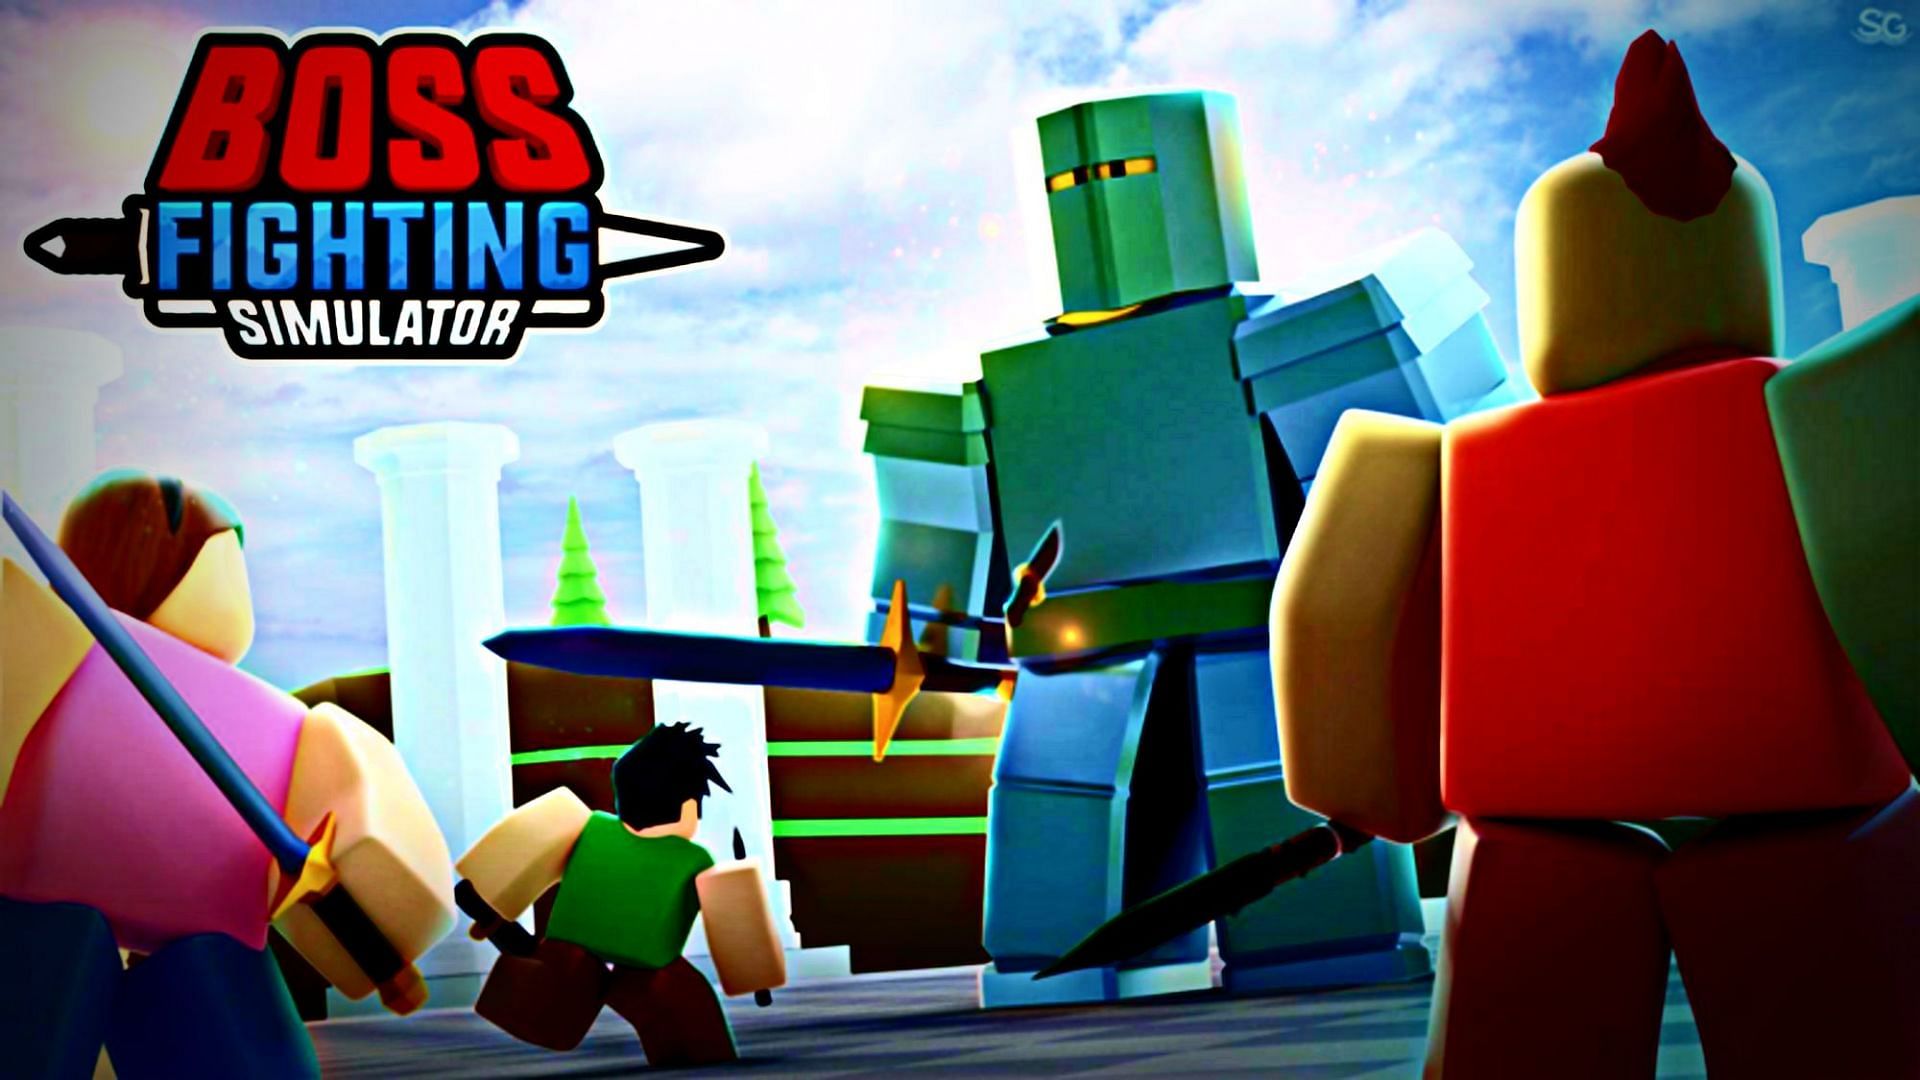 boss-fighting-simulator-codes-in-roblox-free-runes-crystals-and-more